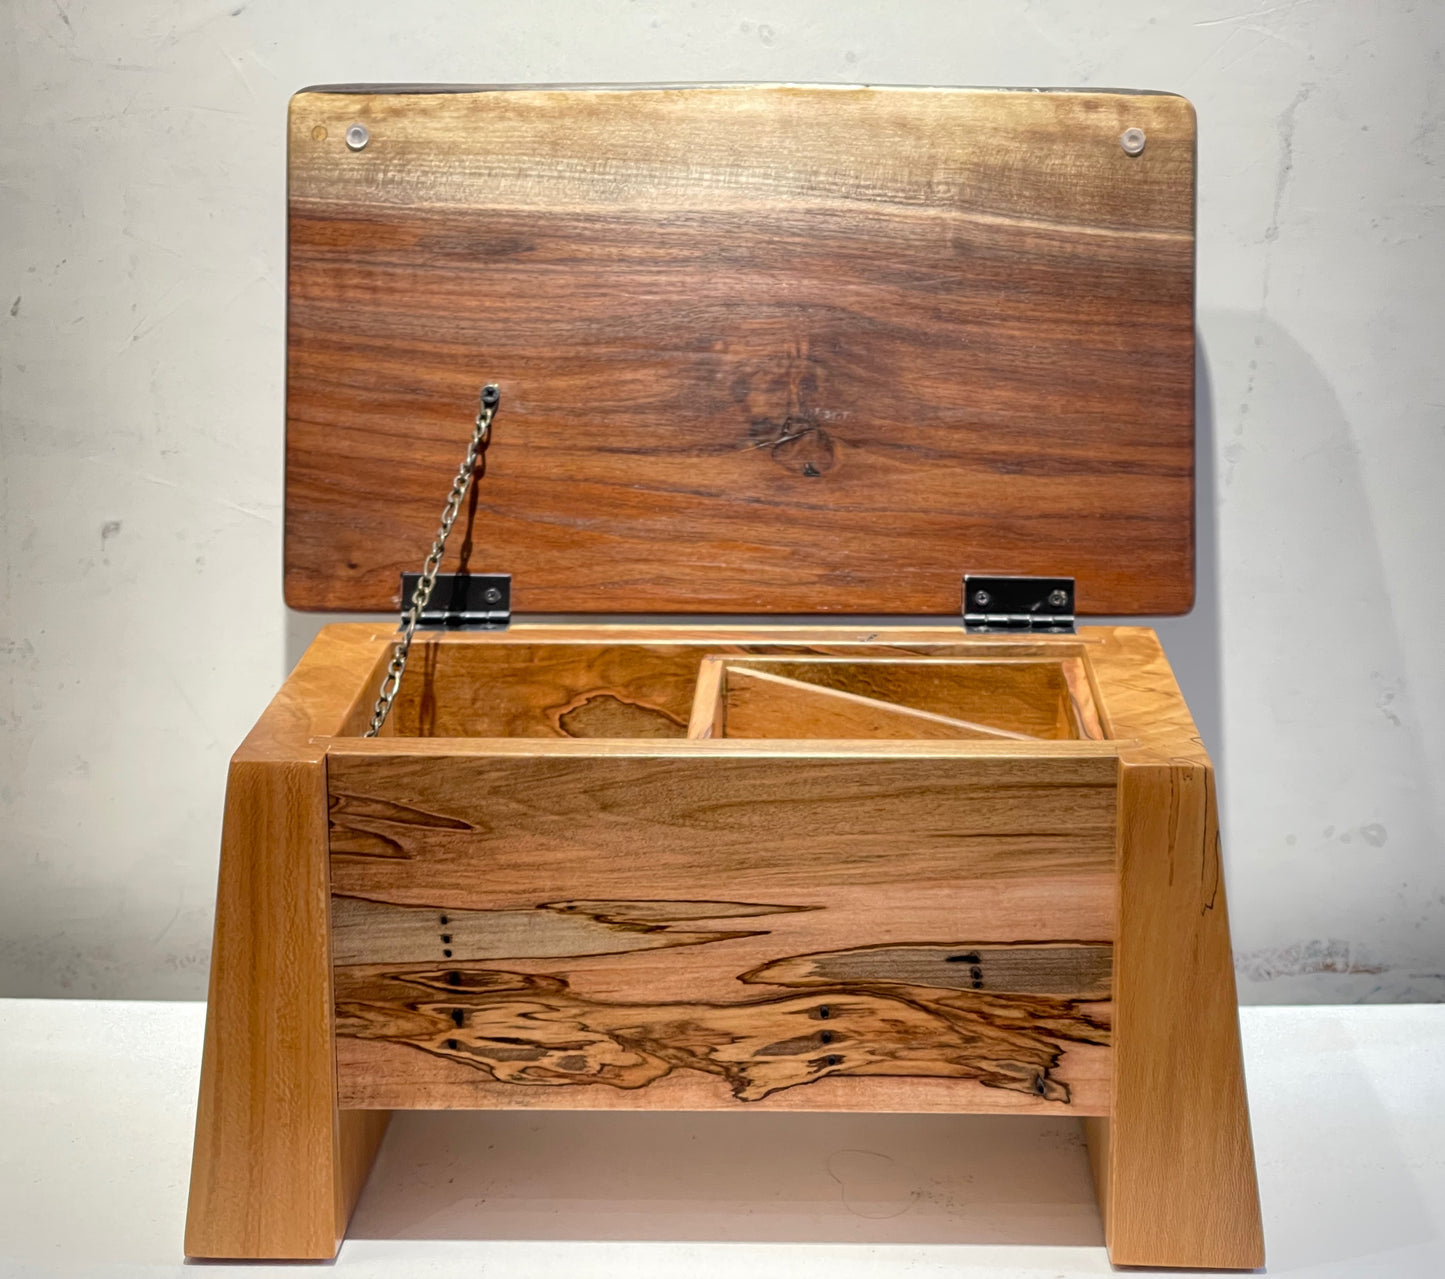 Handmade "Treasure Chest" with Walnut, Spalted Maple and Sycamore